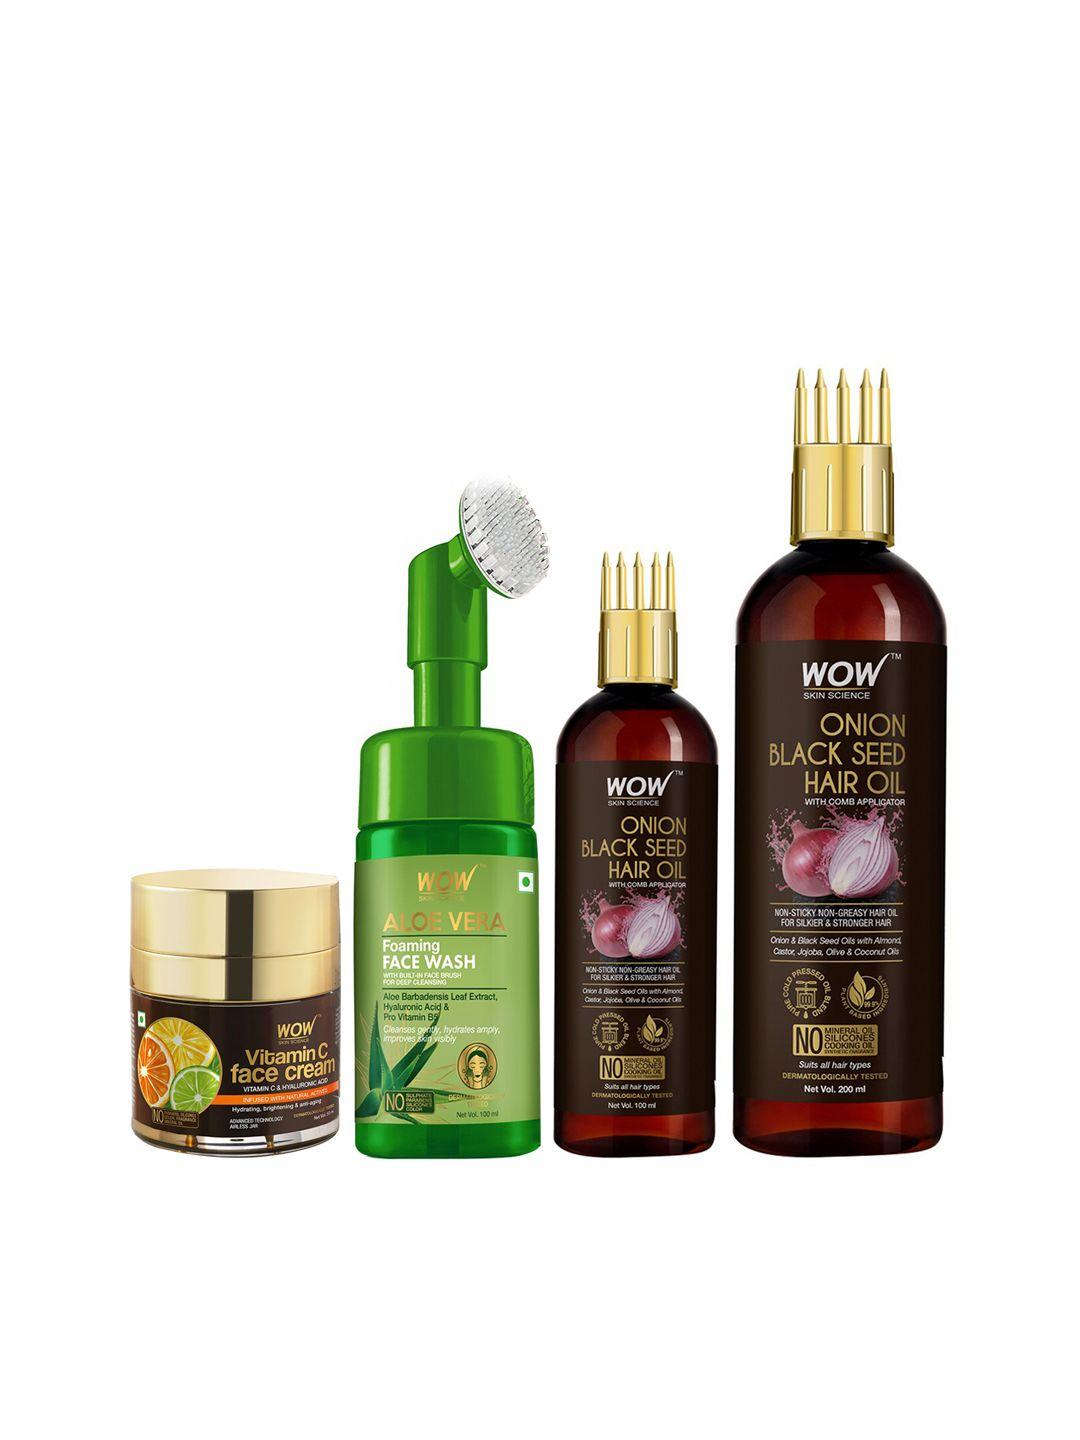 wow skin science set of face cream - face wash & 2 hair oil